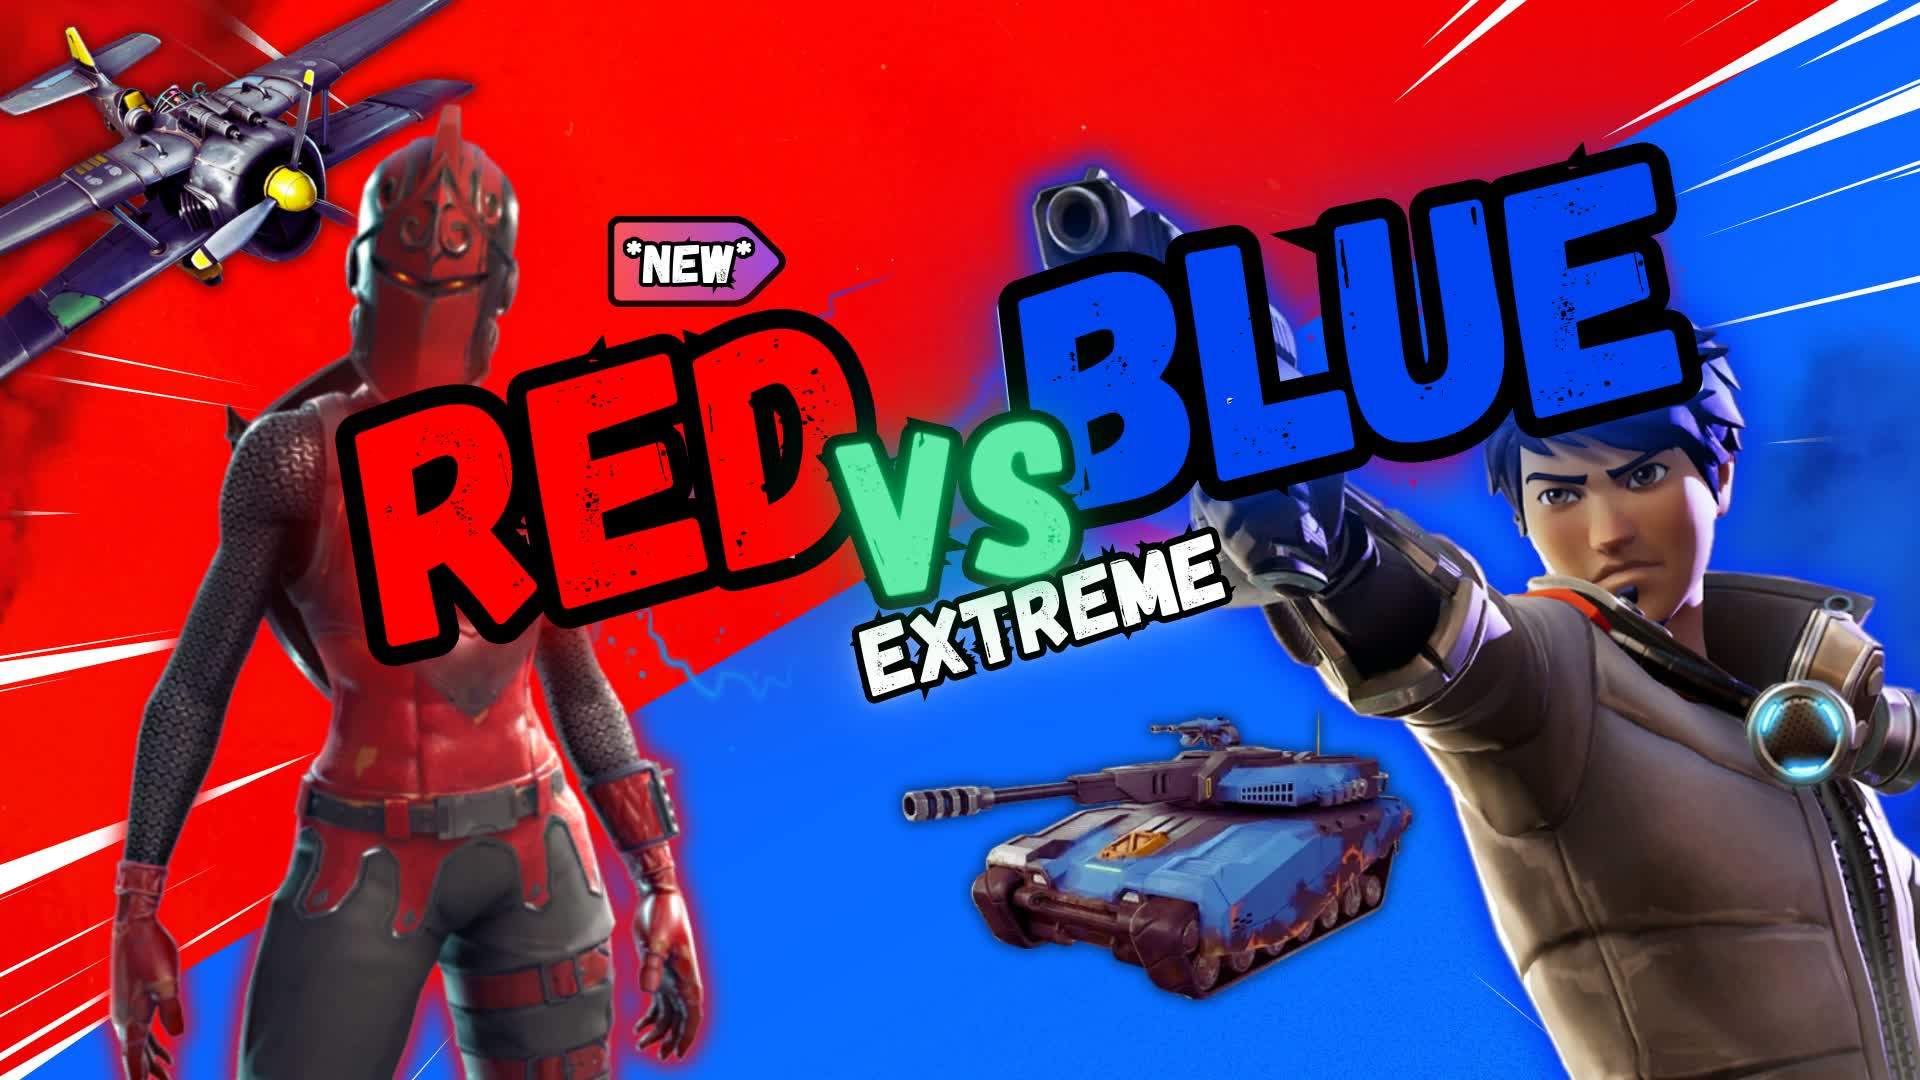 🔴Red vs. Blue EXTREME🔵